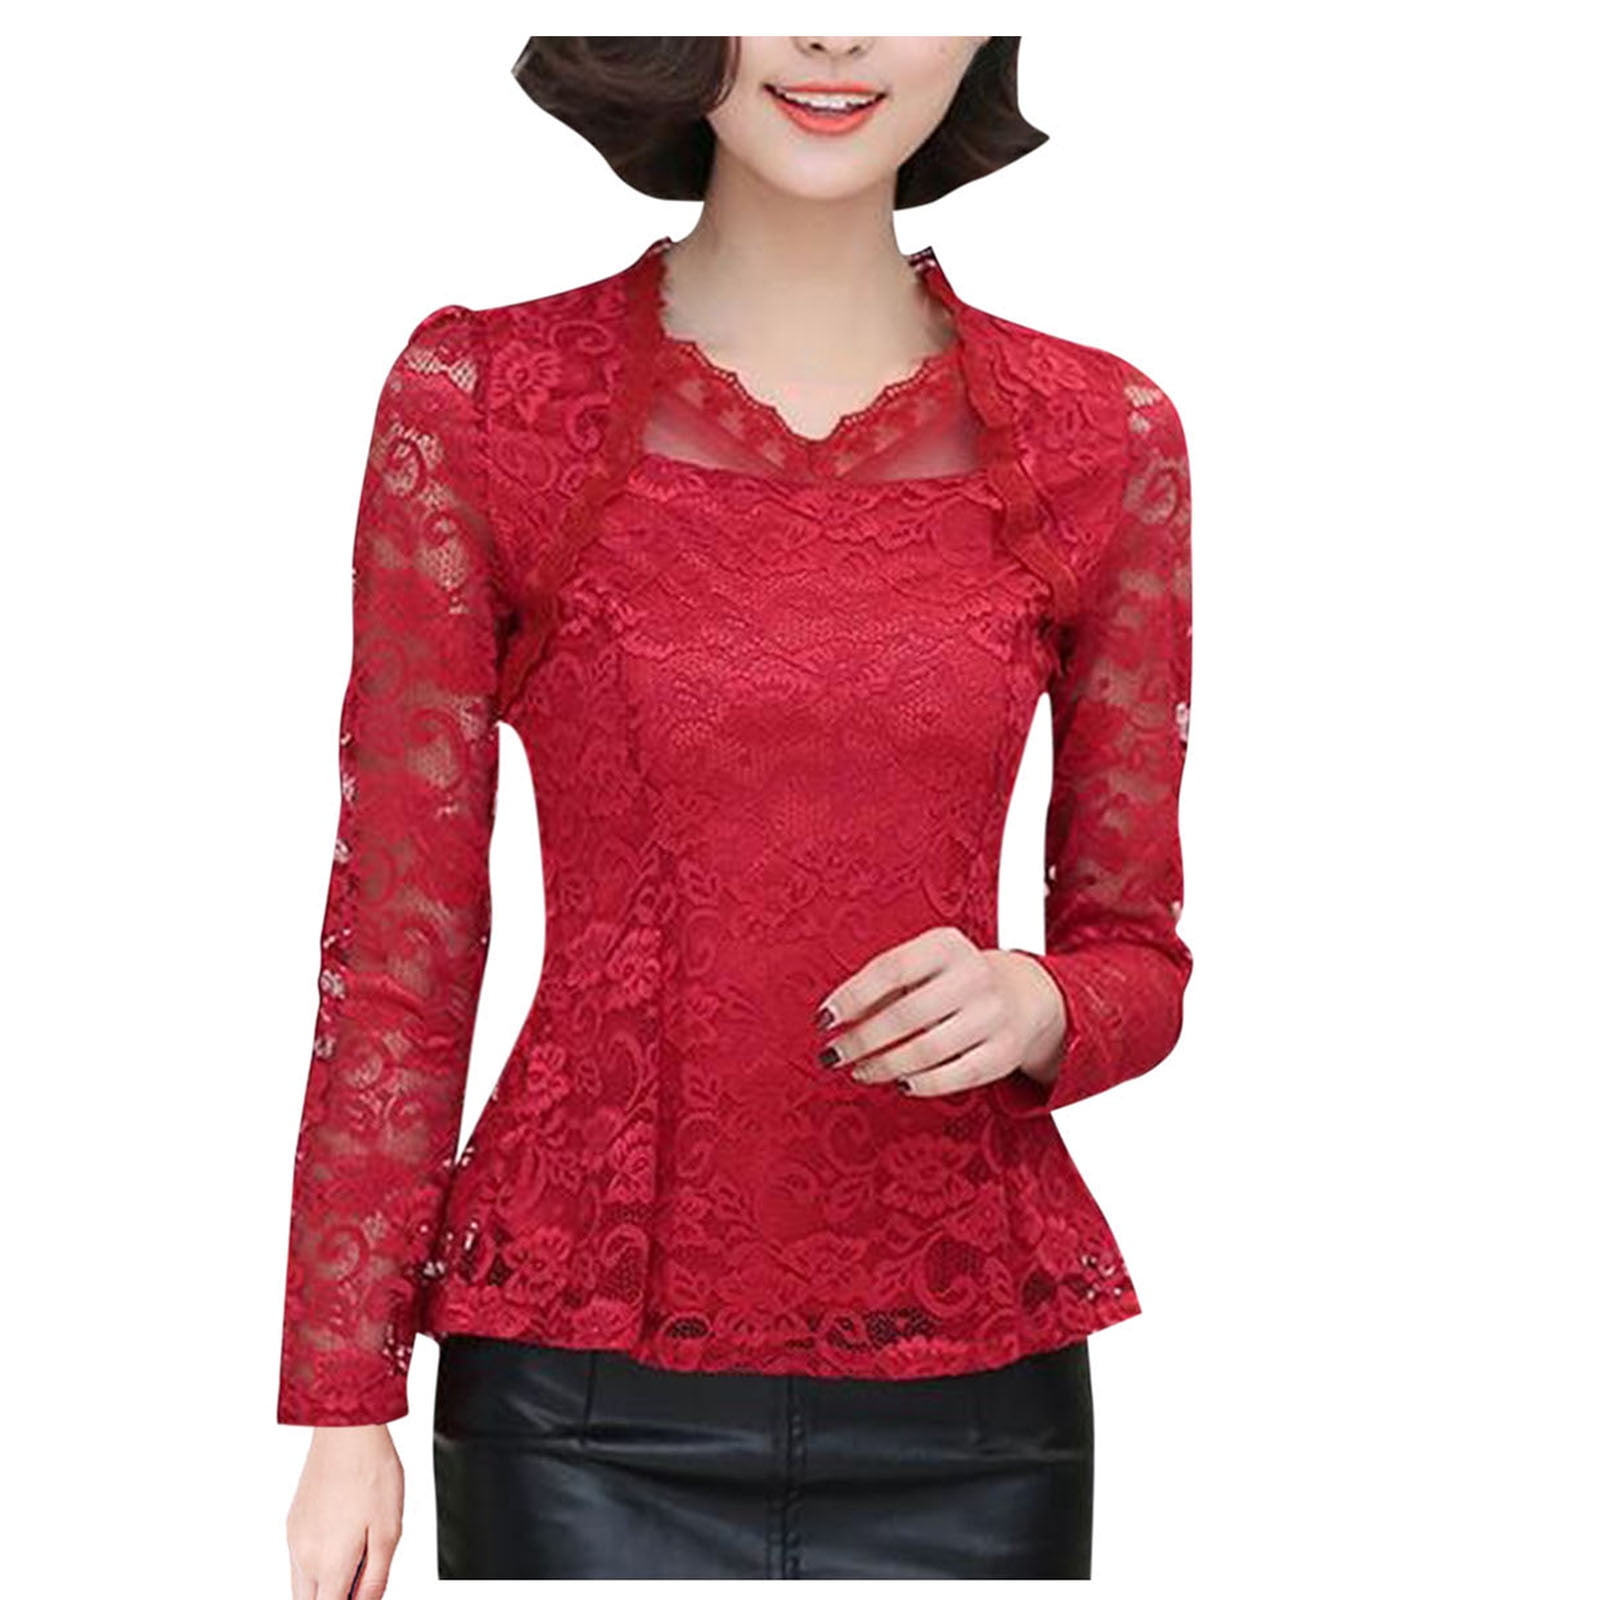 mnjin womens blouses and tops dressy shirts women long sleeve lace shirt crocheted lace blouse top t shirt red - Walmart.com